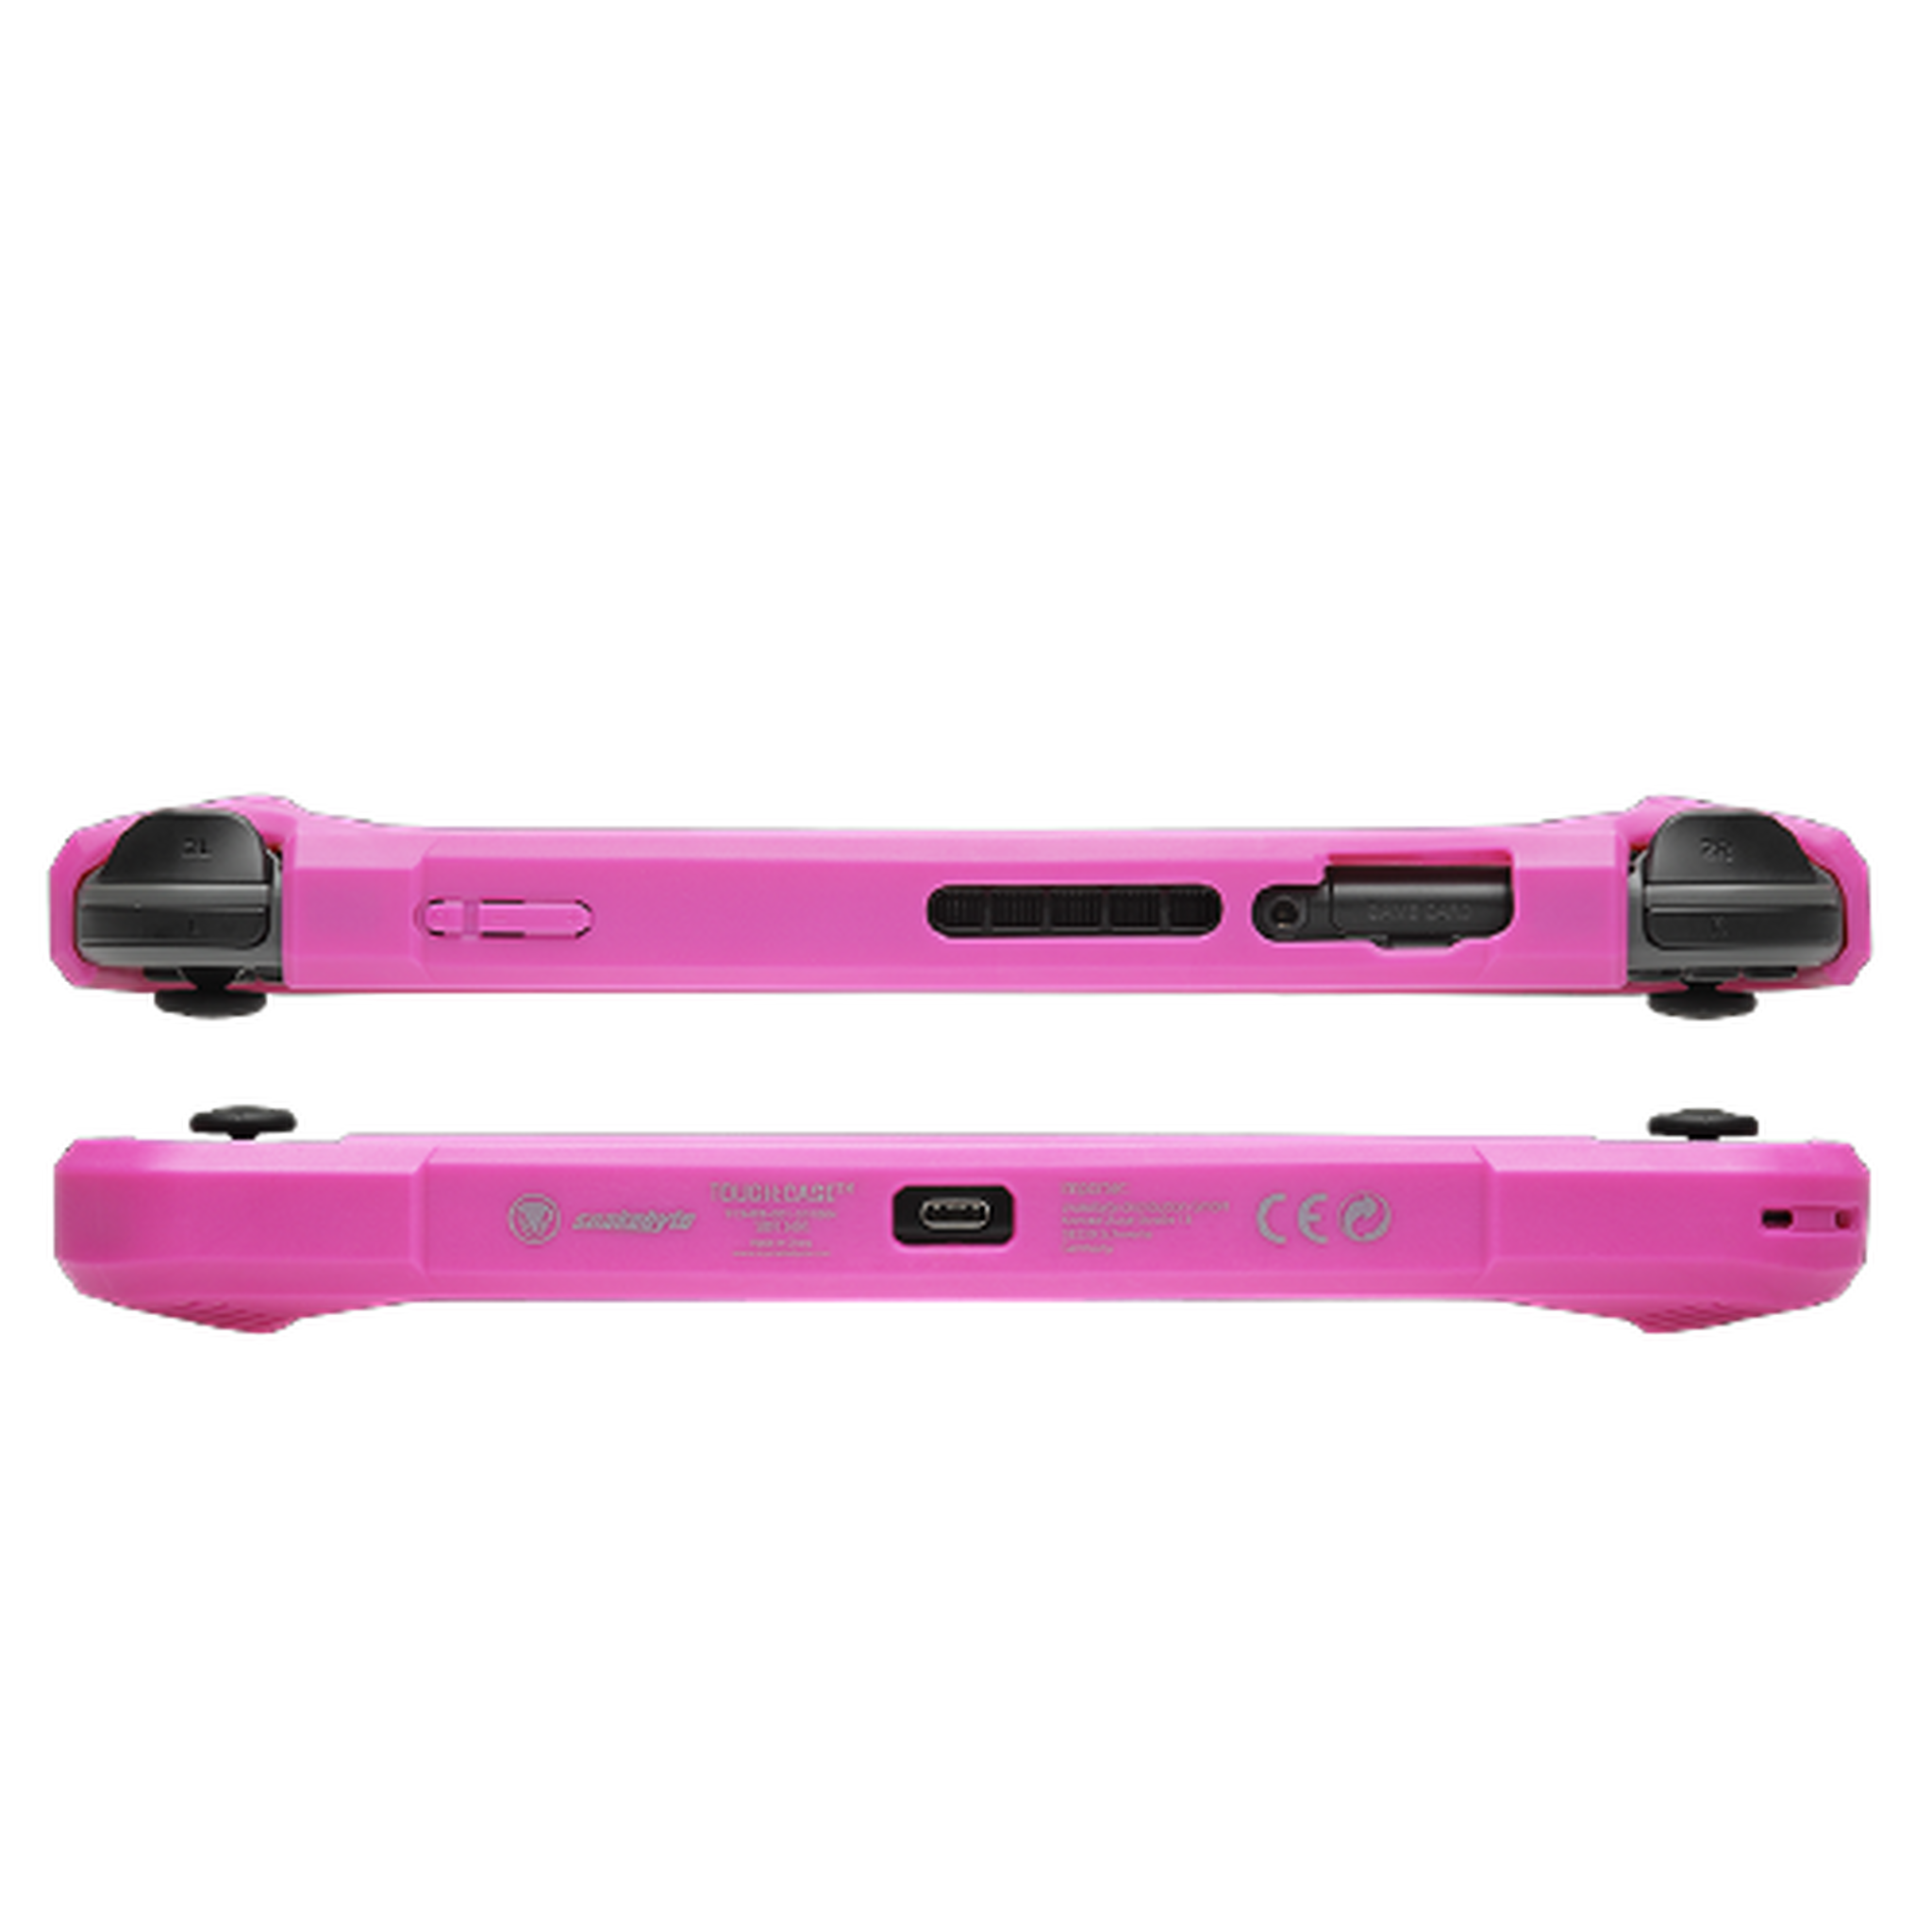 Snake Byte Tough Case For Nintendo Switch - Strawberry Pink